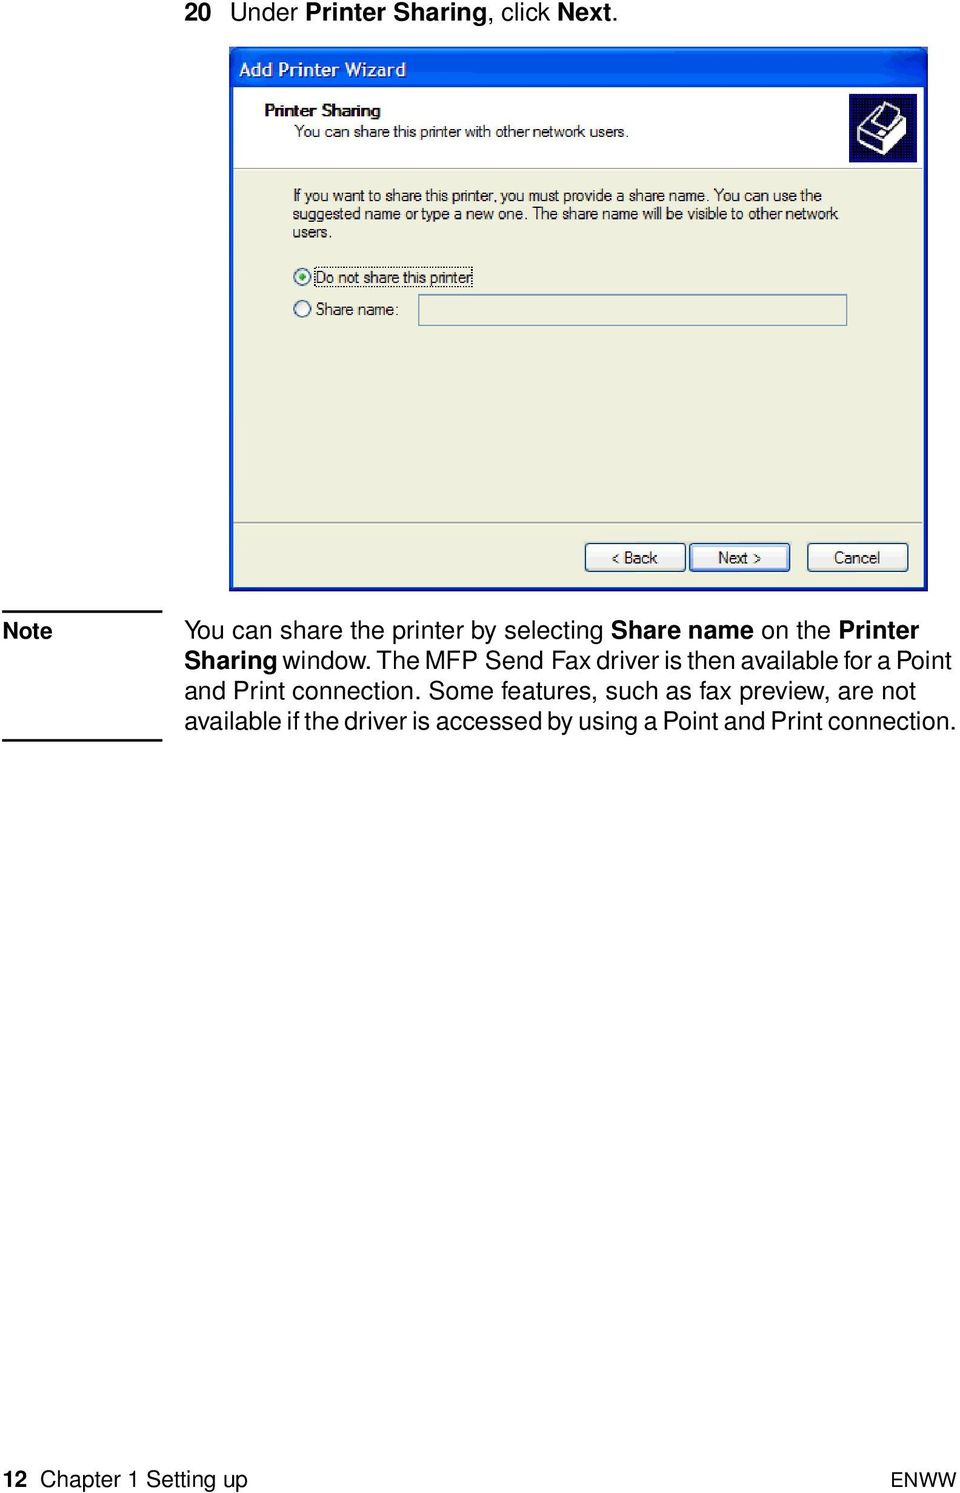 The MFP Send Fax driver is then available for a Point and Print connection.